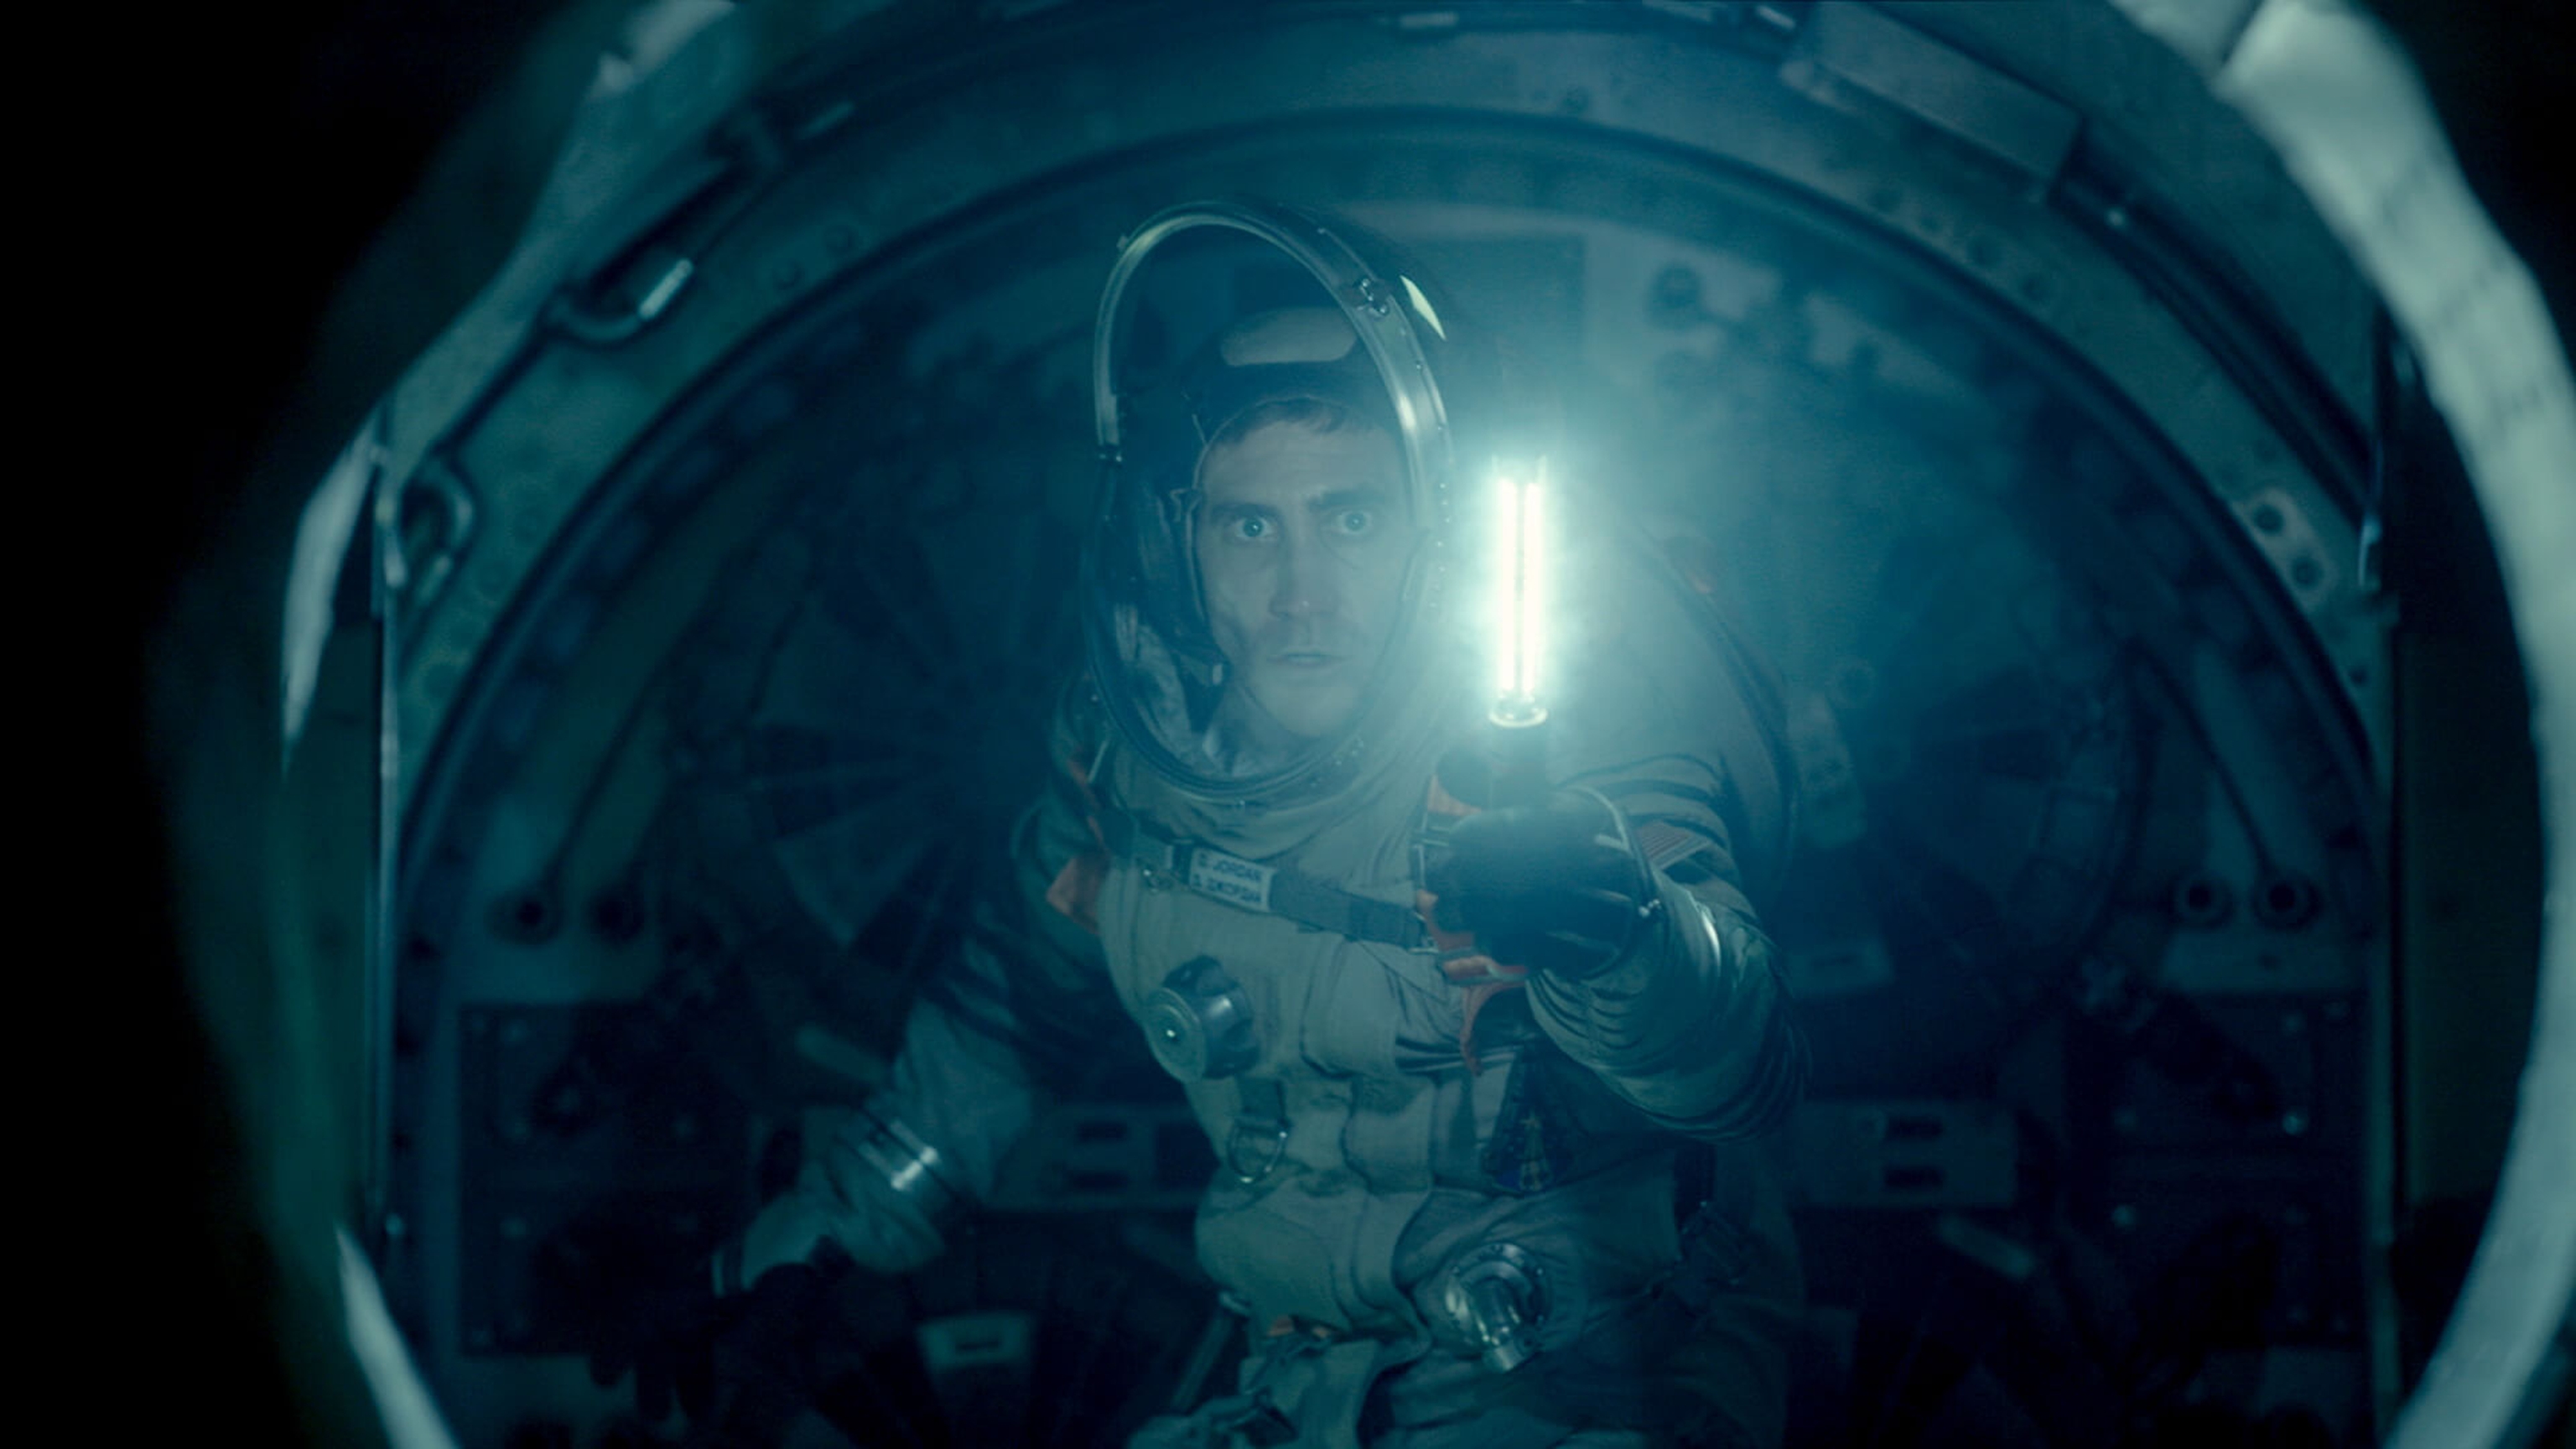 A spaceman holding a light looking through a spherical window